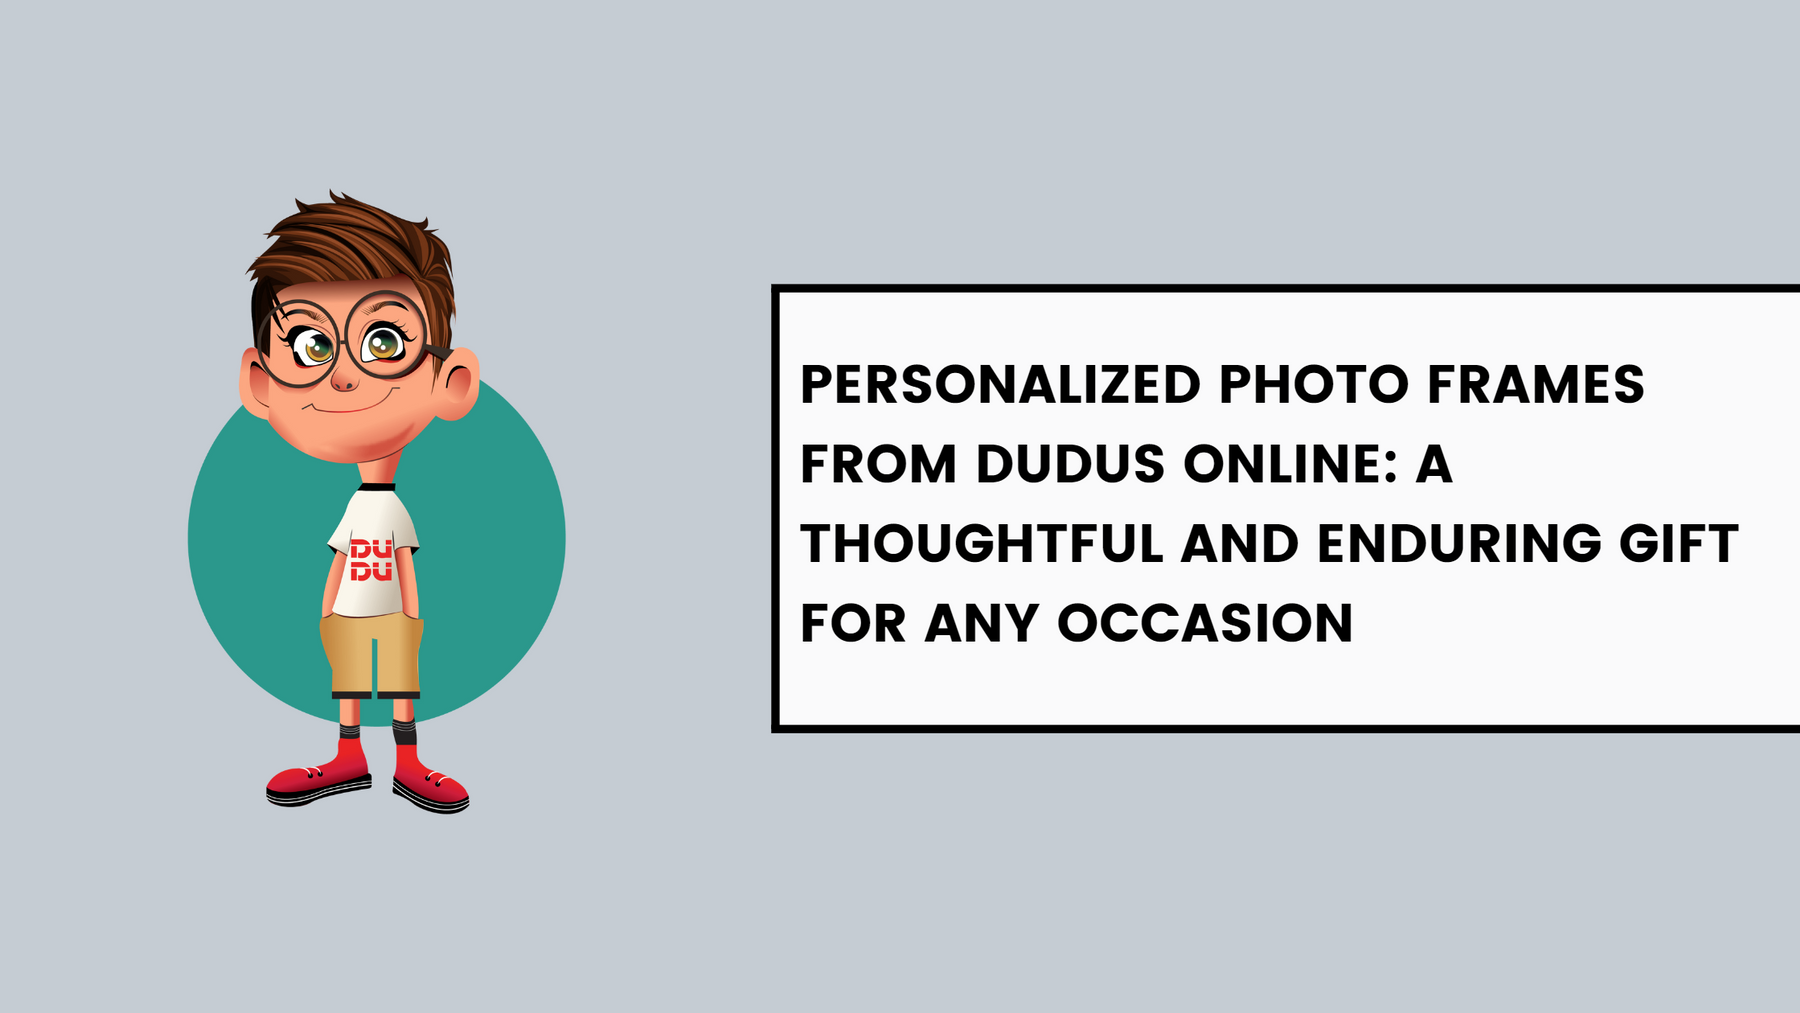 Personalized Photo Frames from Dudus Online: A Thoughtful and Enduring Gift for Any Occasion